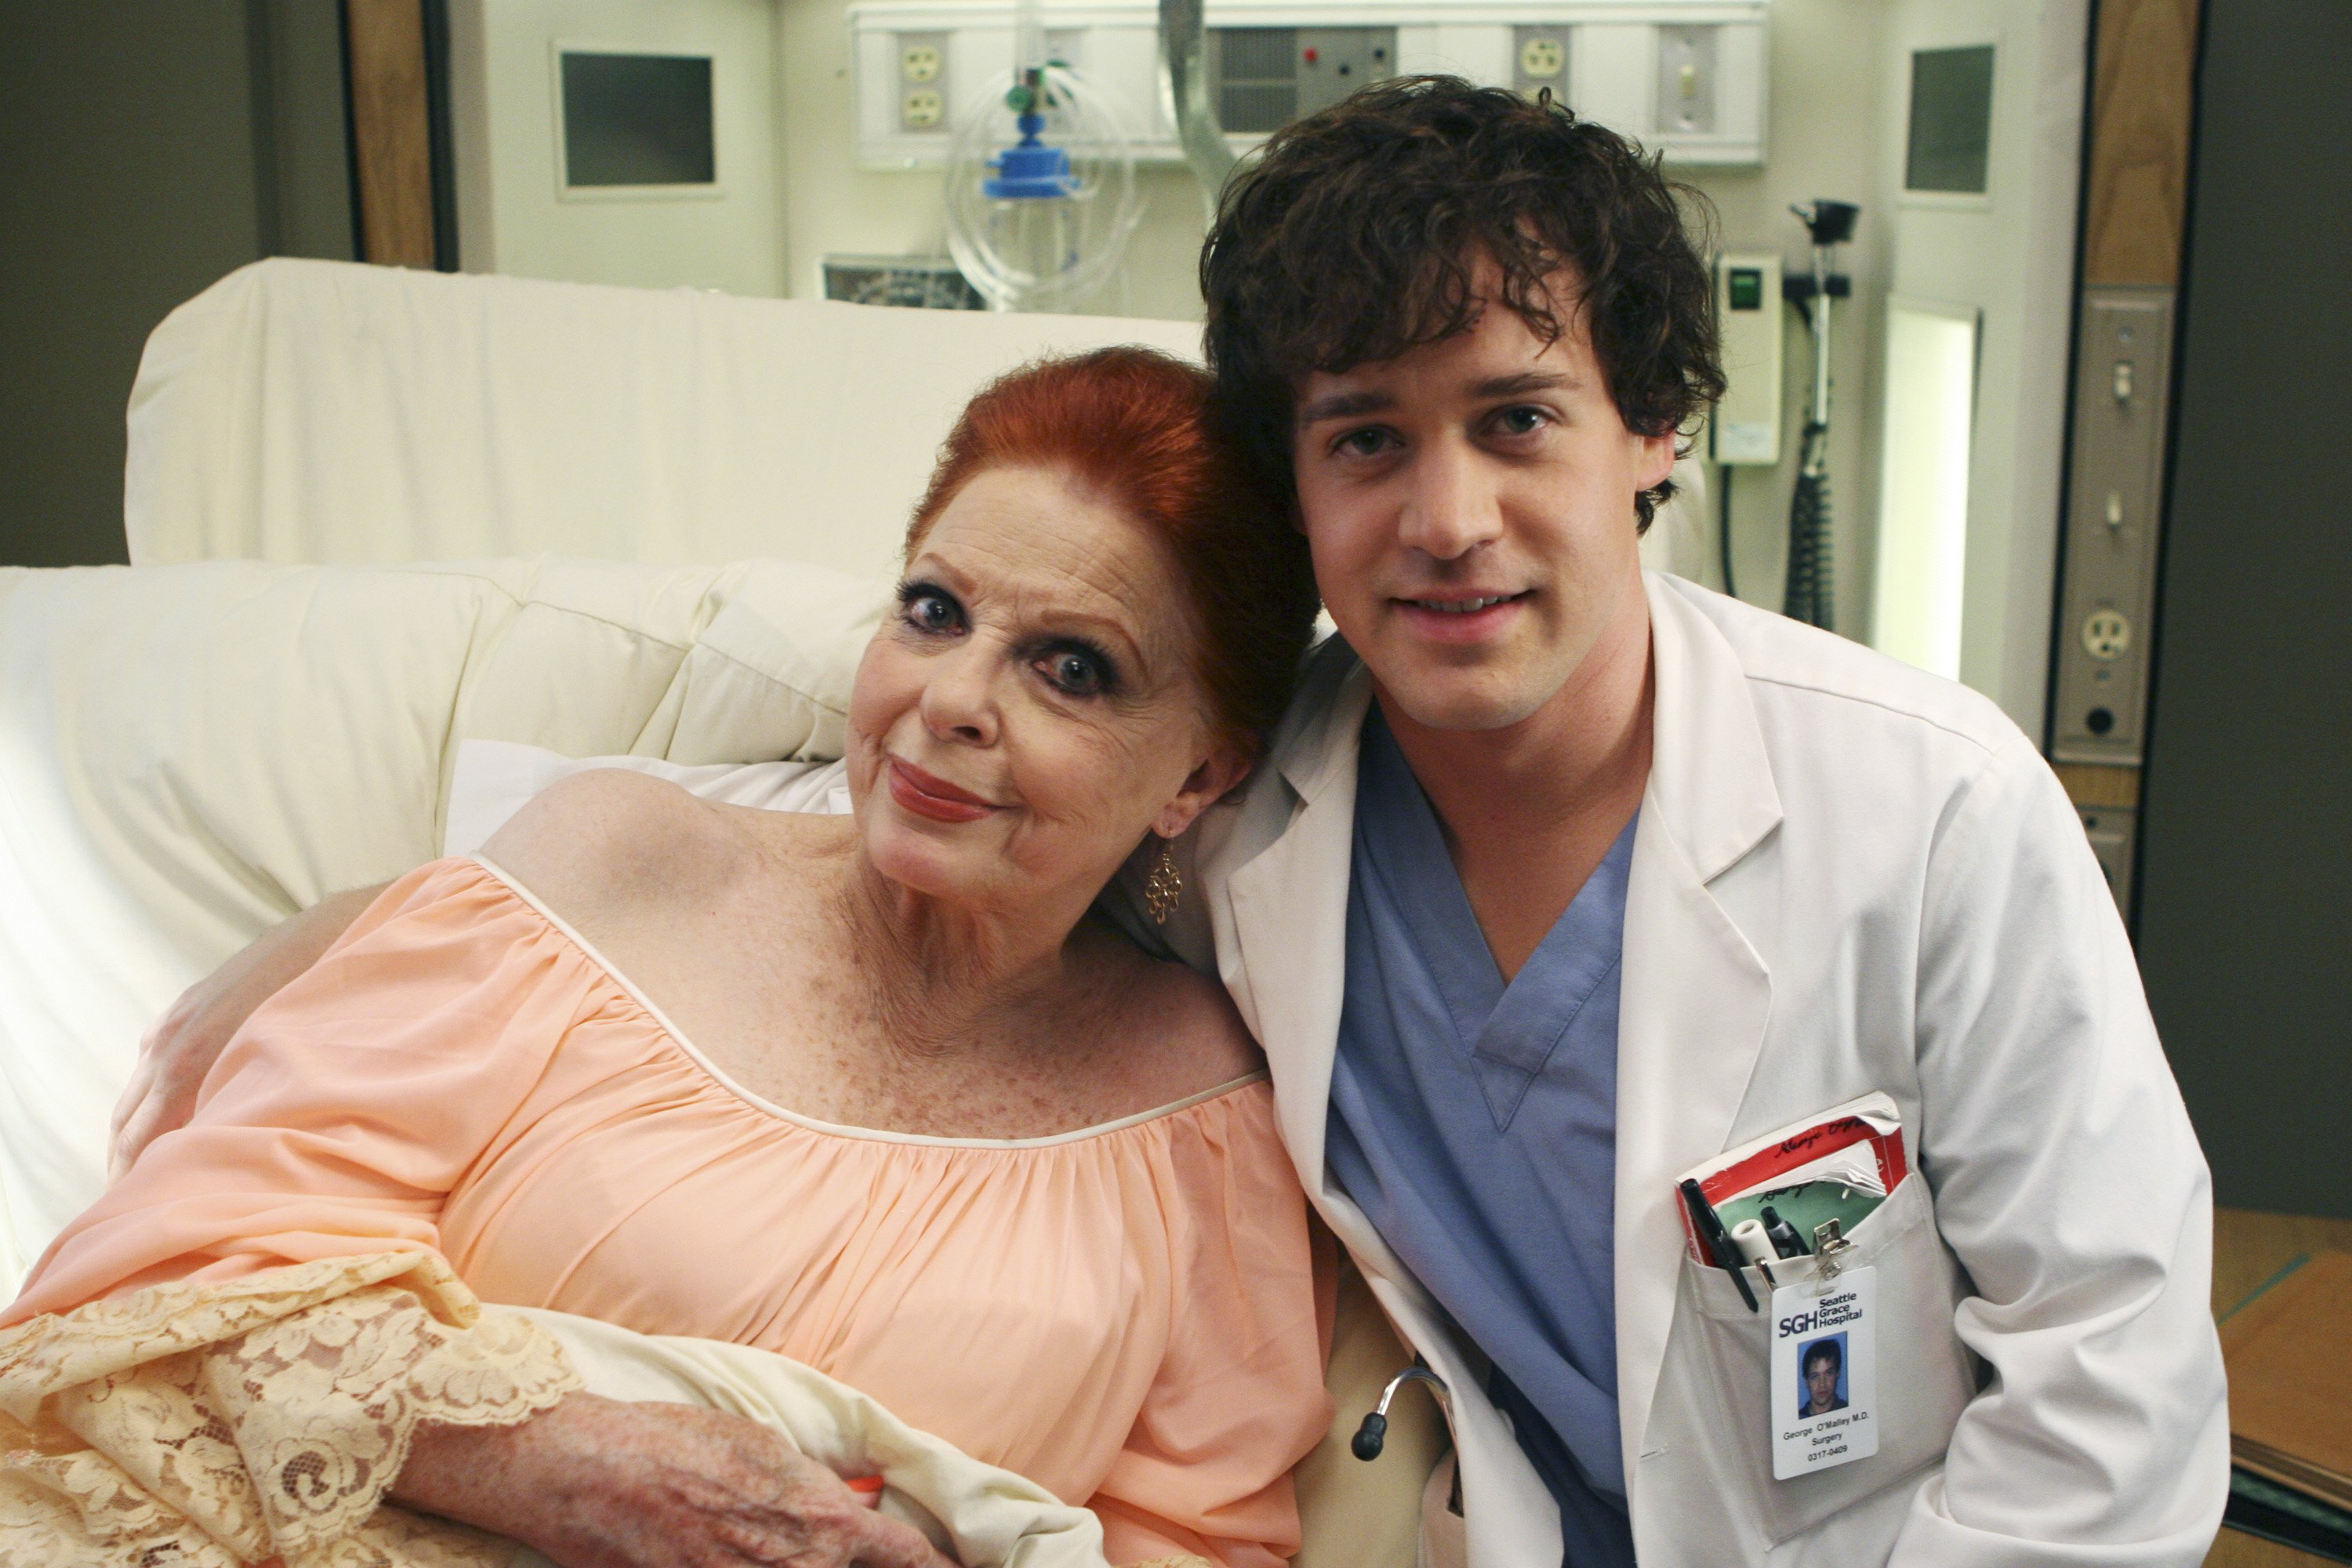 Carole Cook with another actor on "Grey's Anatomy" on October 26, 2005 | Source: Getty Images